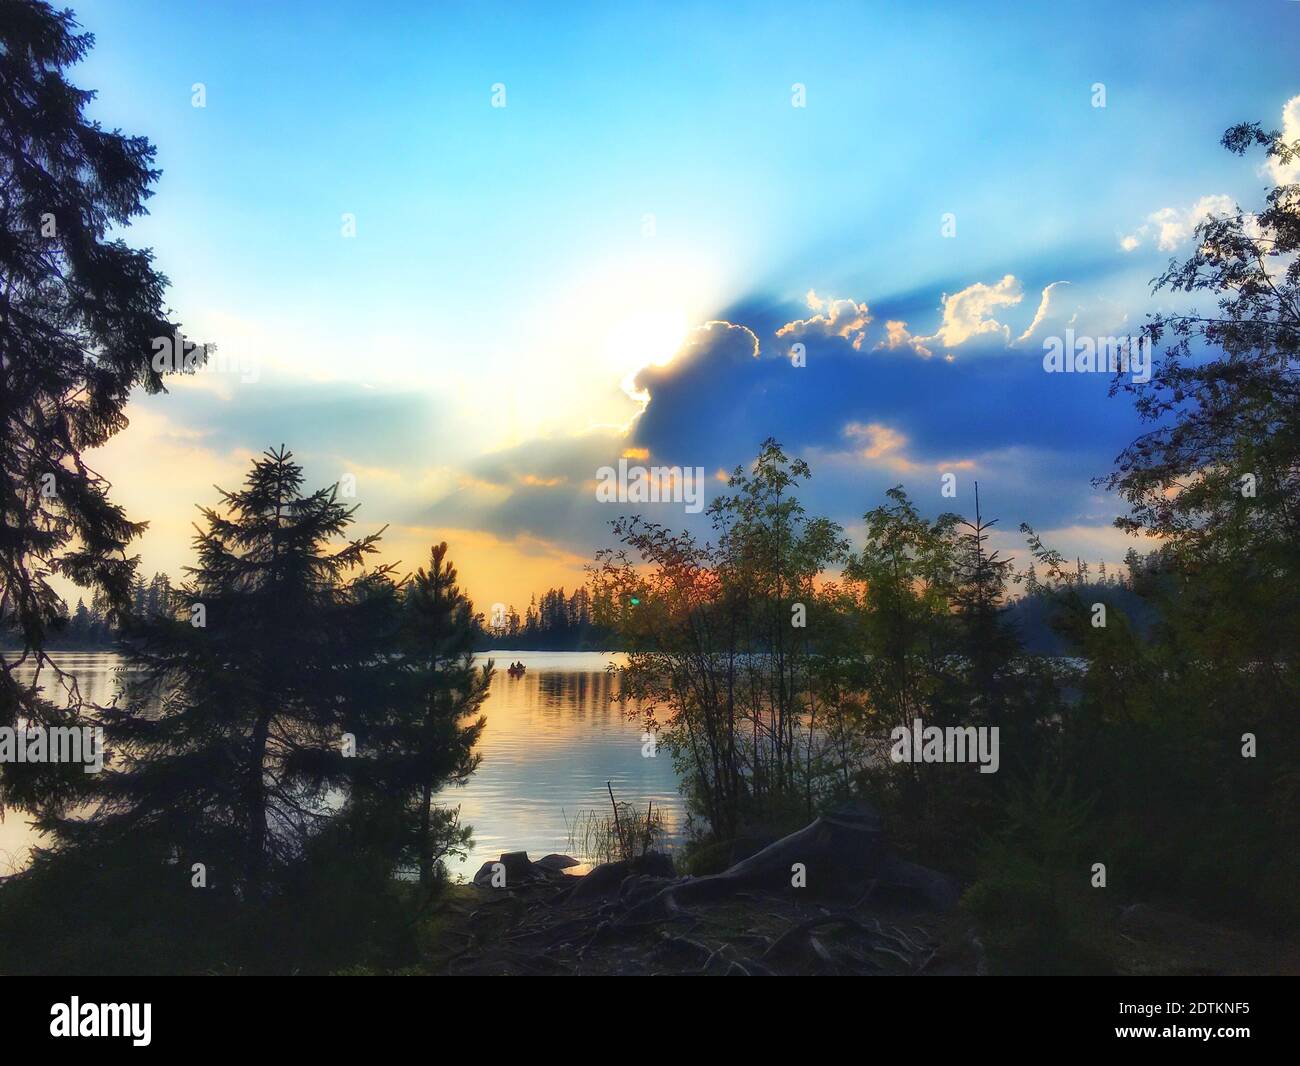 Scenic View Of Lake Against Sky During Sunset Stock Photo